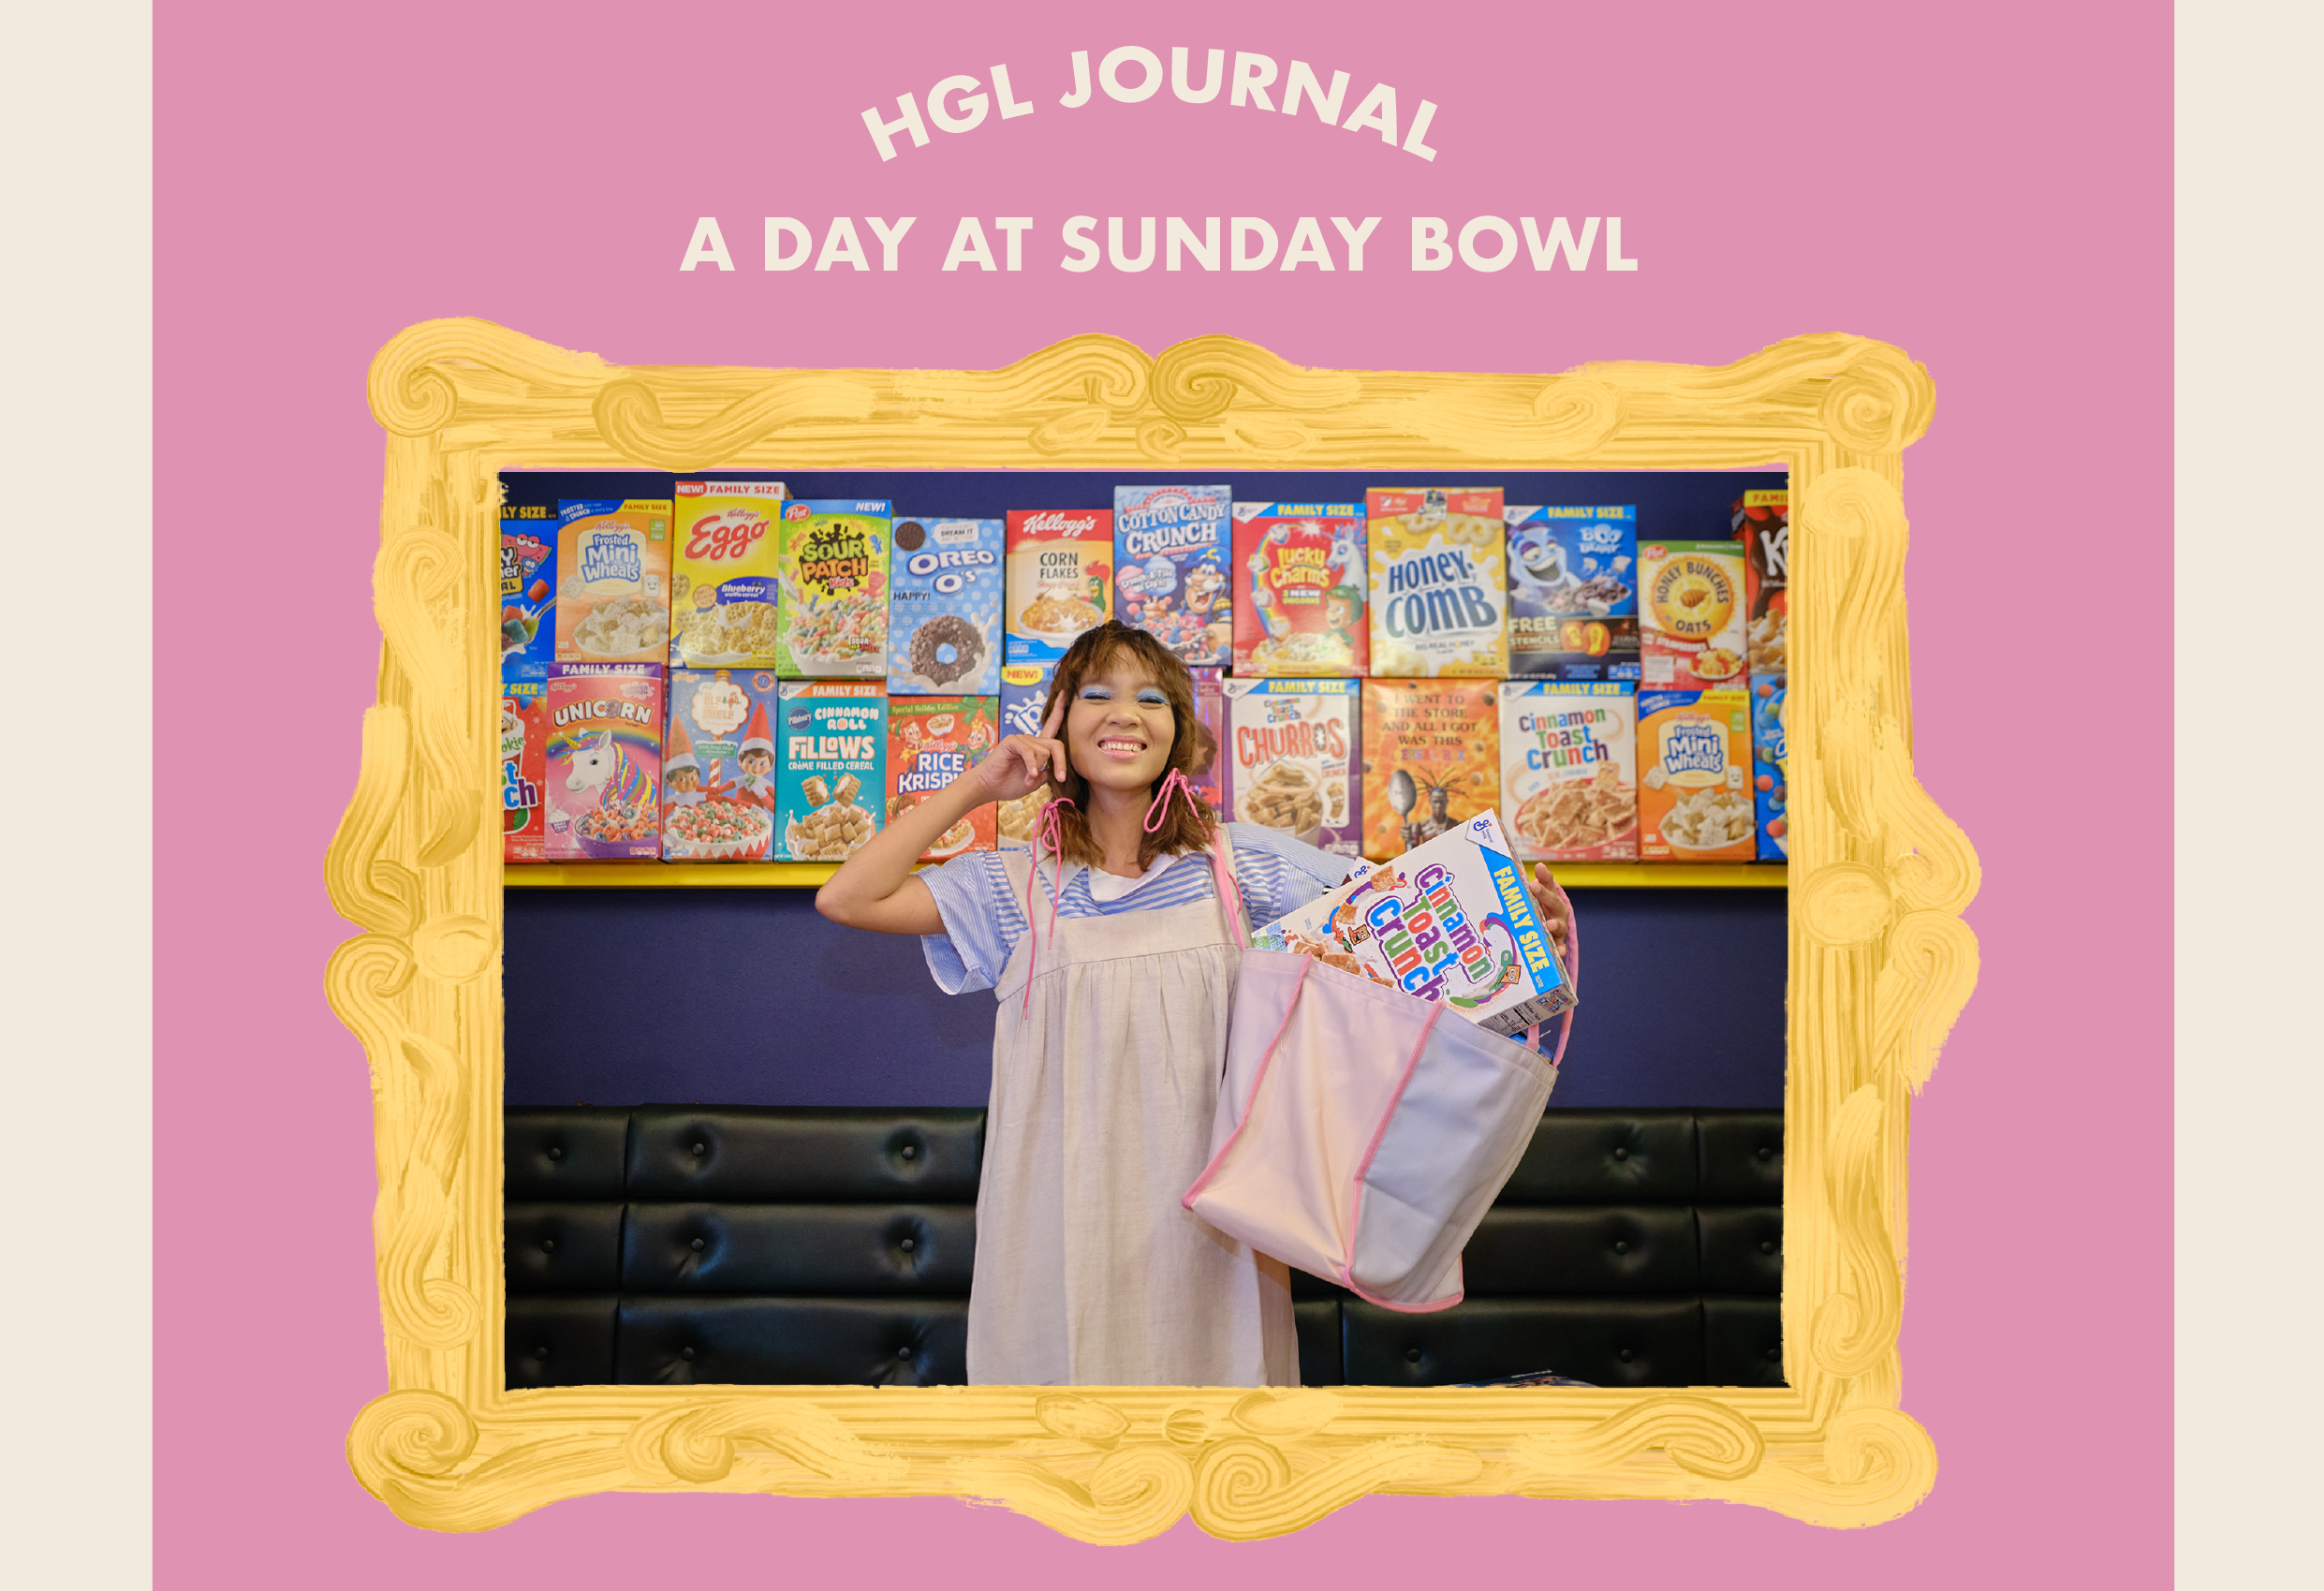 HGL JOURNAL A DAY AT SUNDAY BOWL